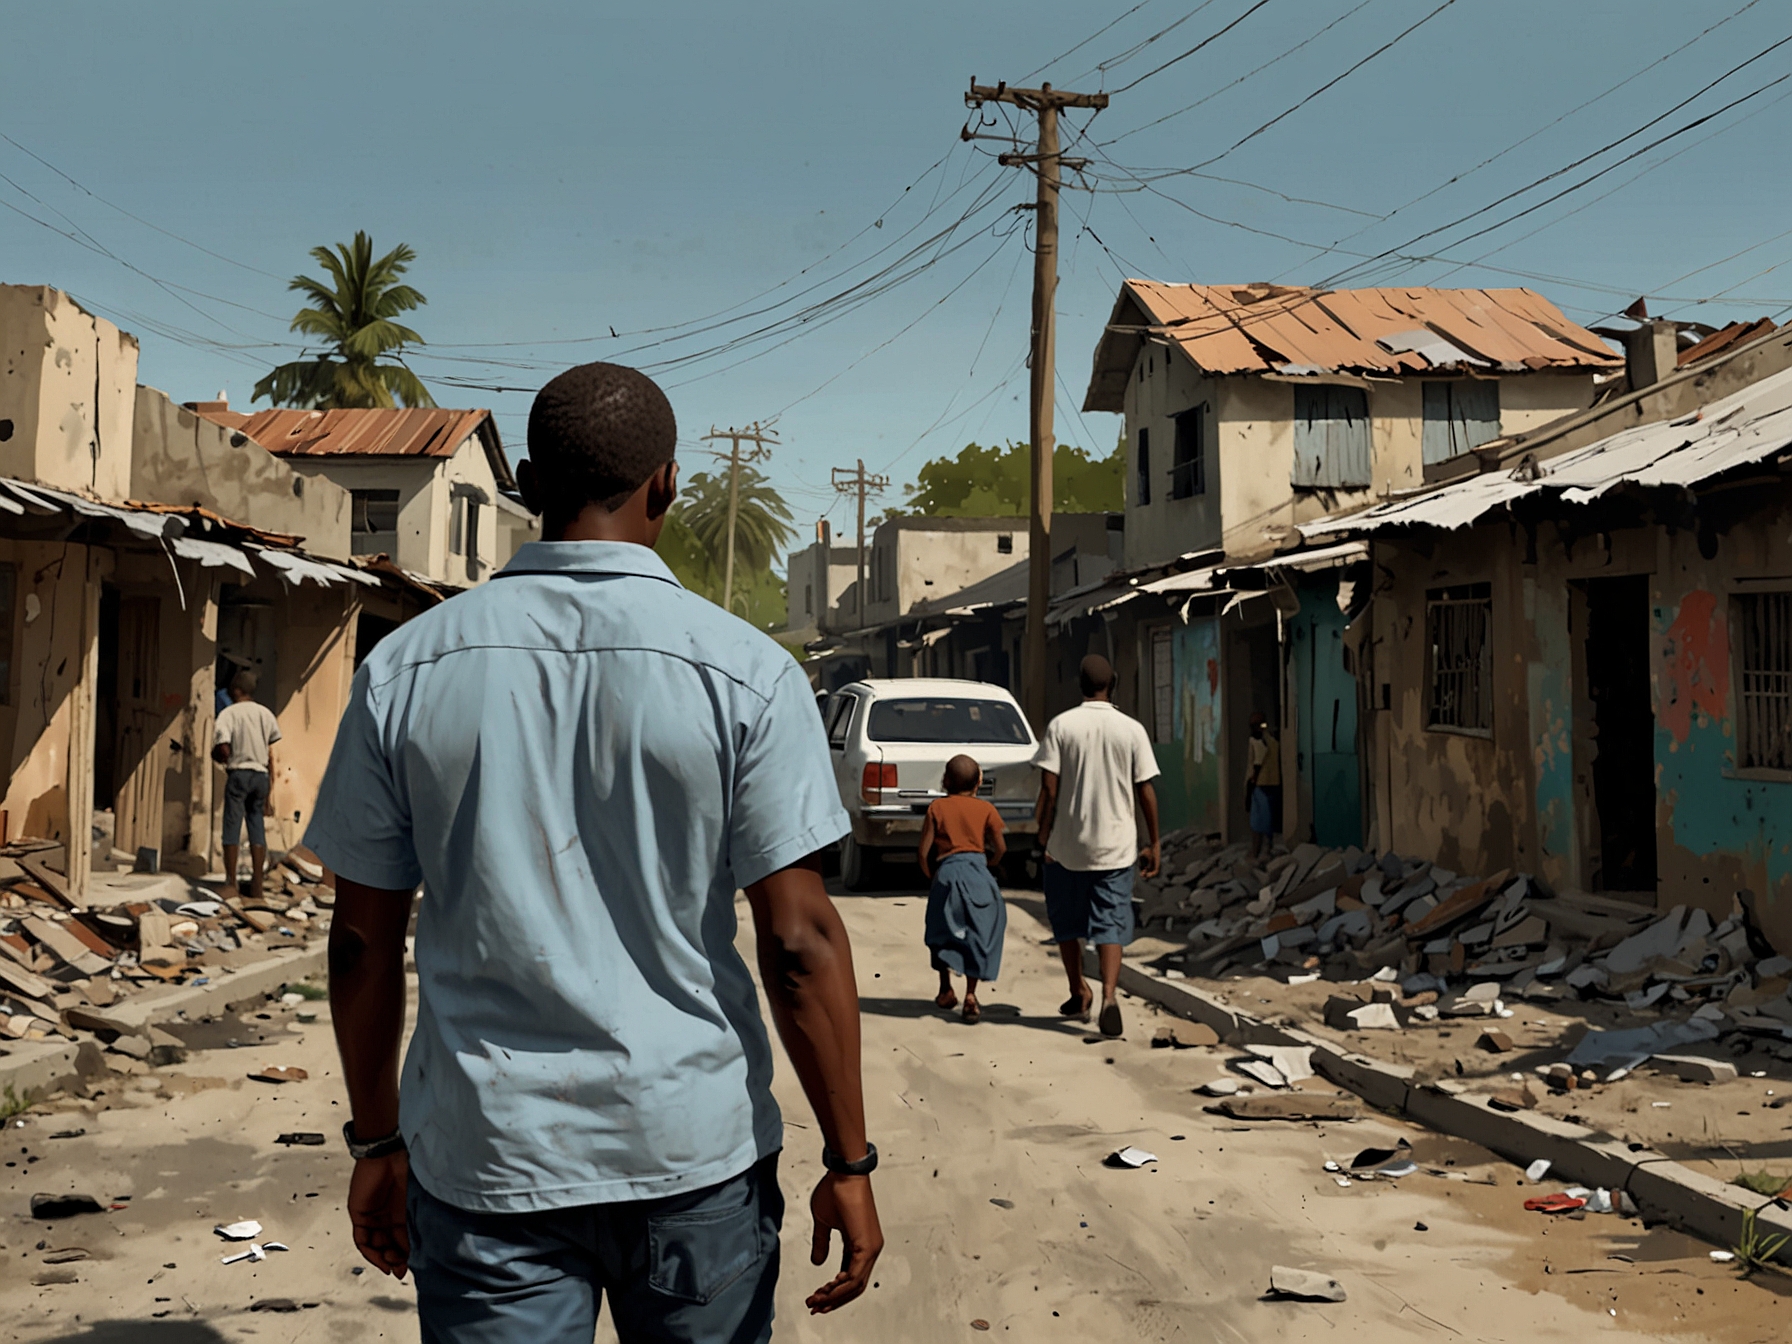 An image depicting the areas in Haiti affected by gang violence, highlighting the disrupted daily life and the critical infrastructure impacted by the criminal activities.